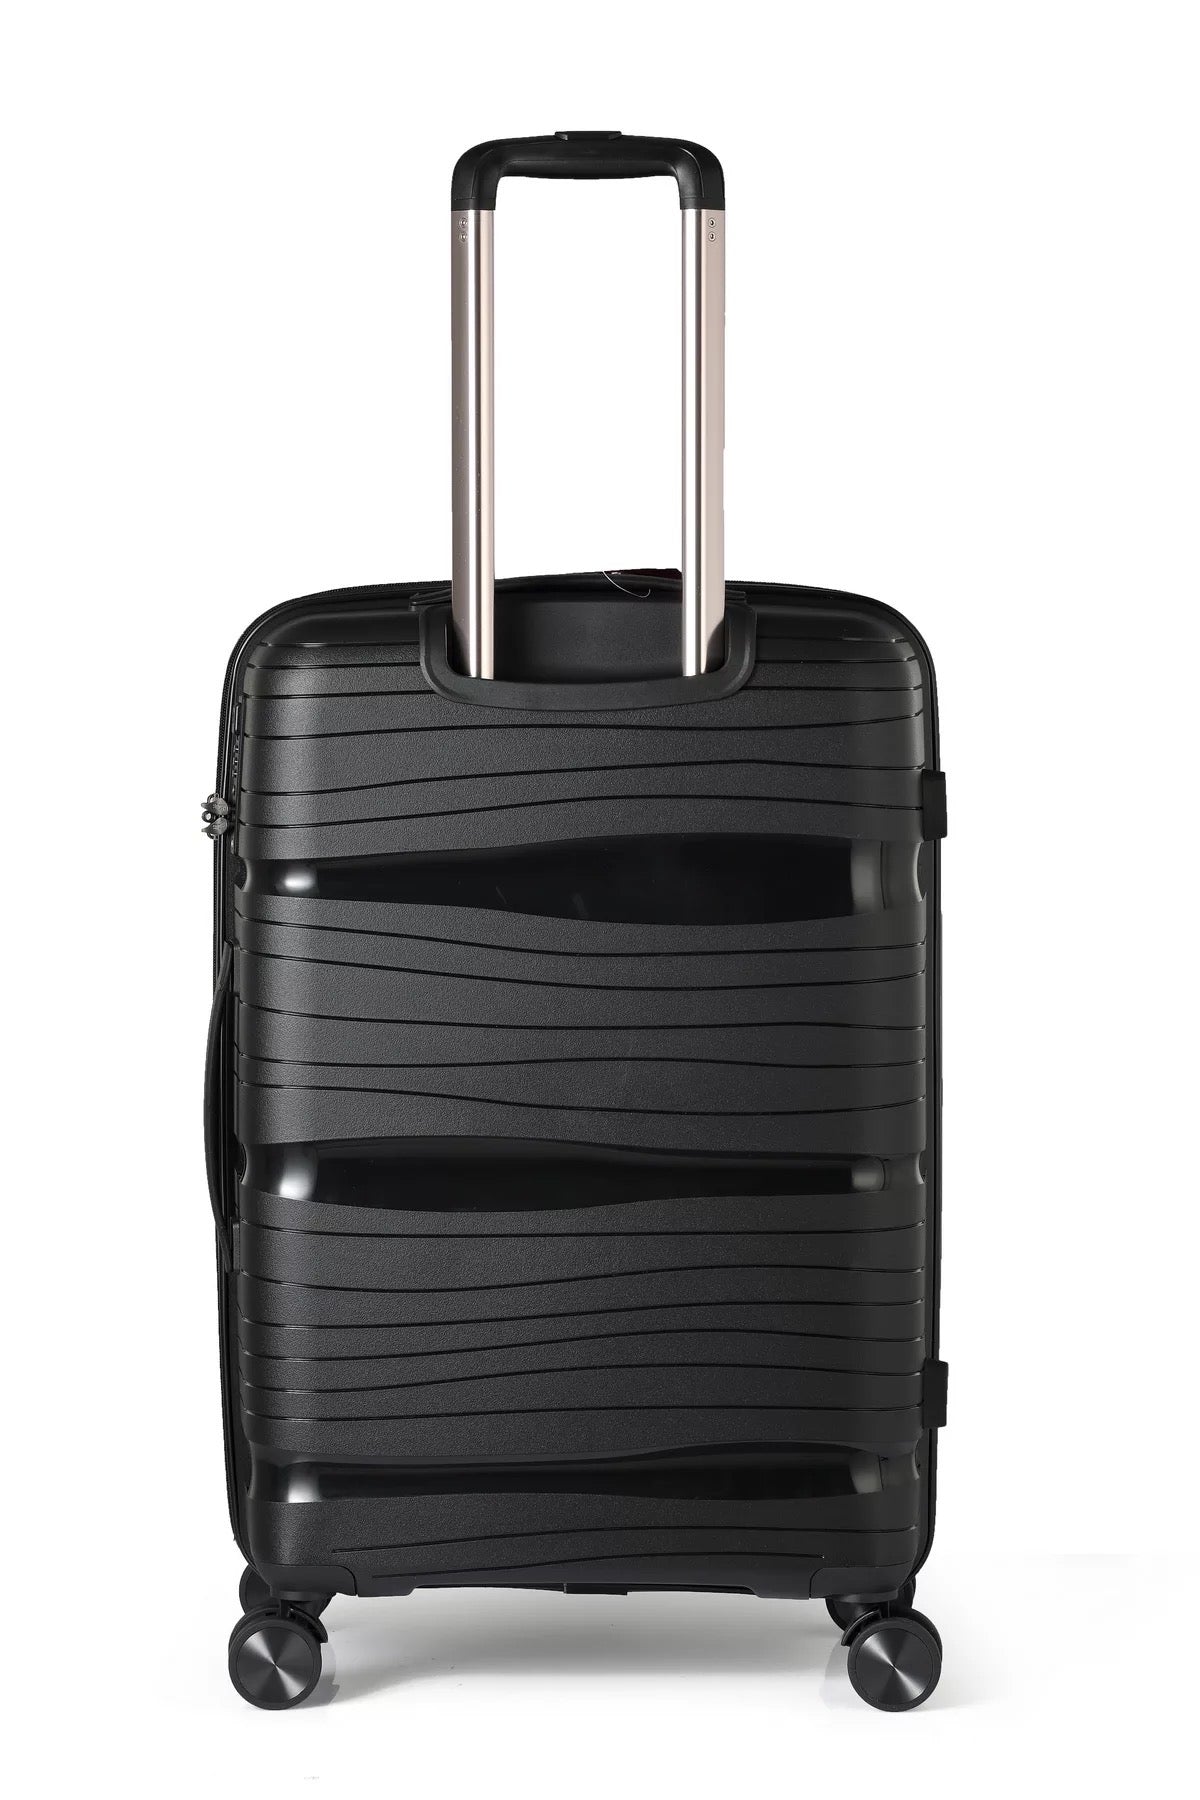 20" Black Colour Royal PP Lightweight Hard Case Carry On Trolley Bag With Double Spinner Wheel